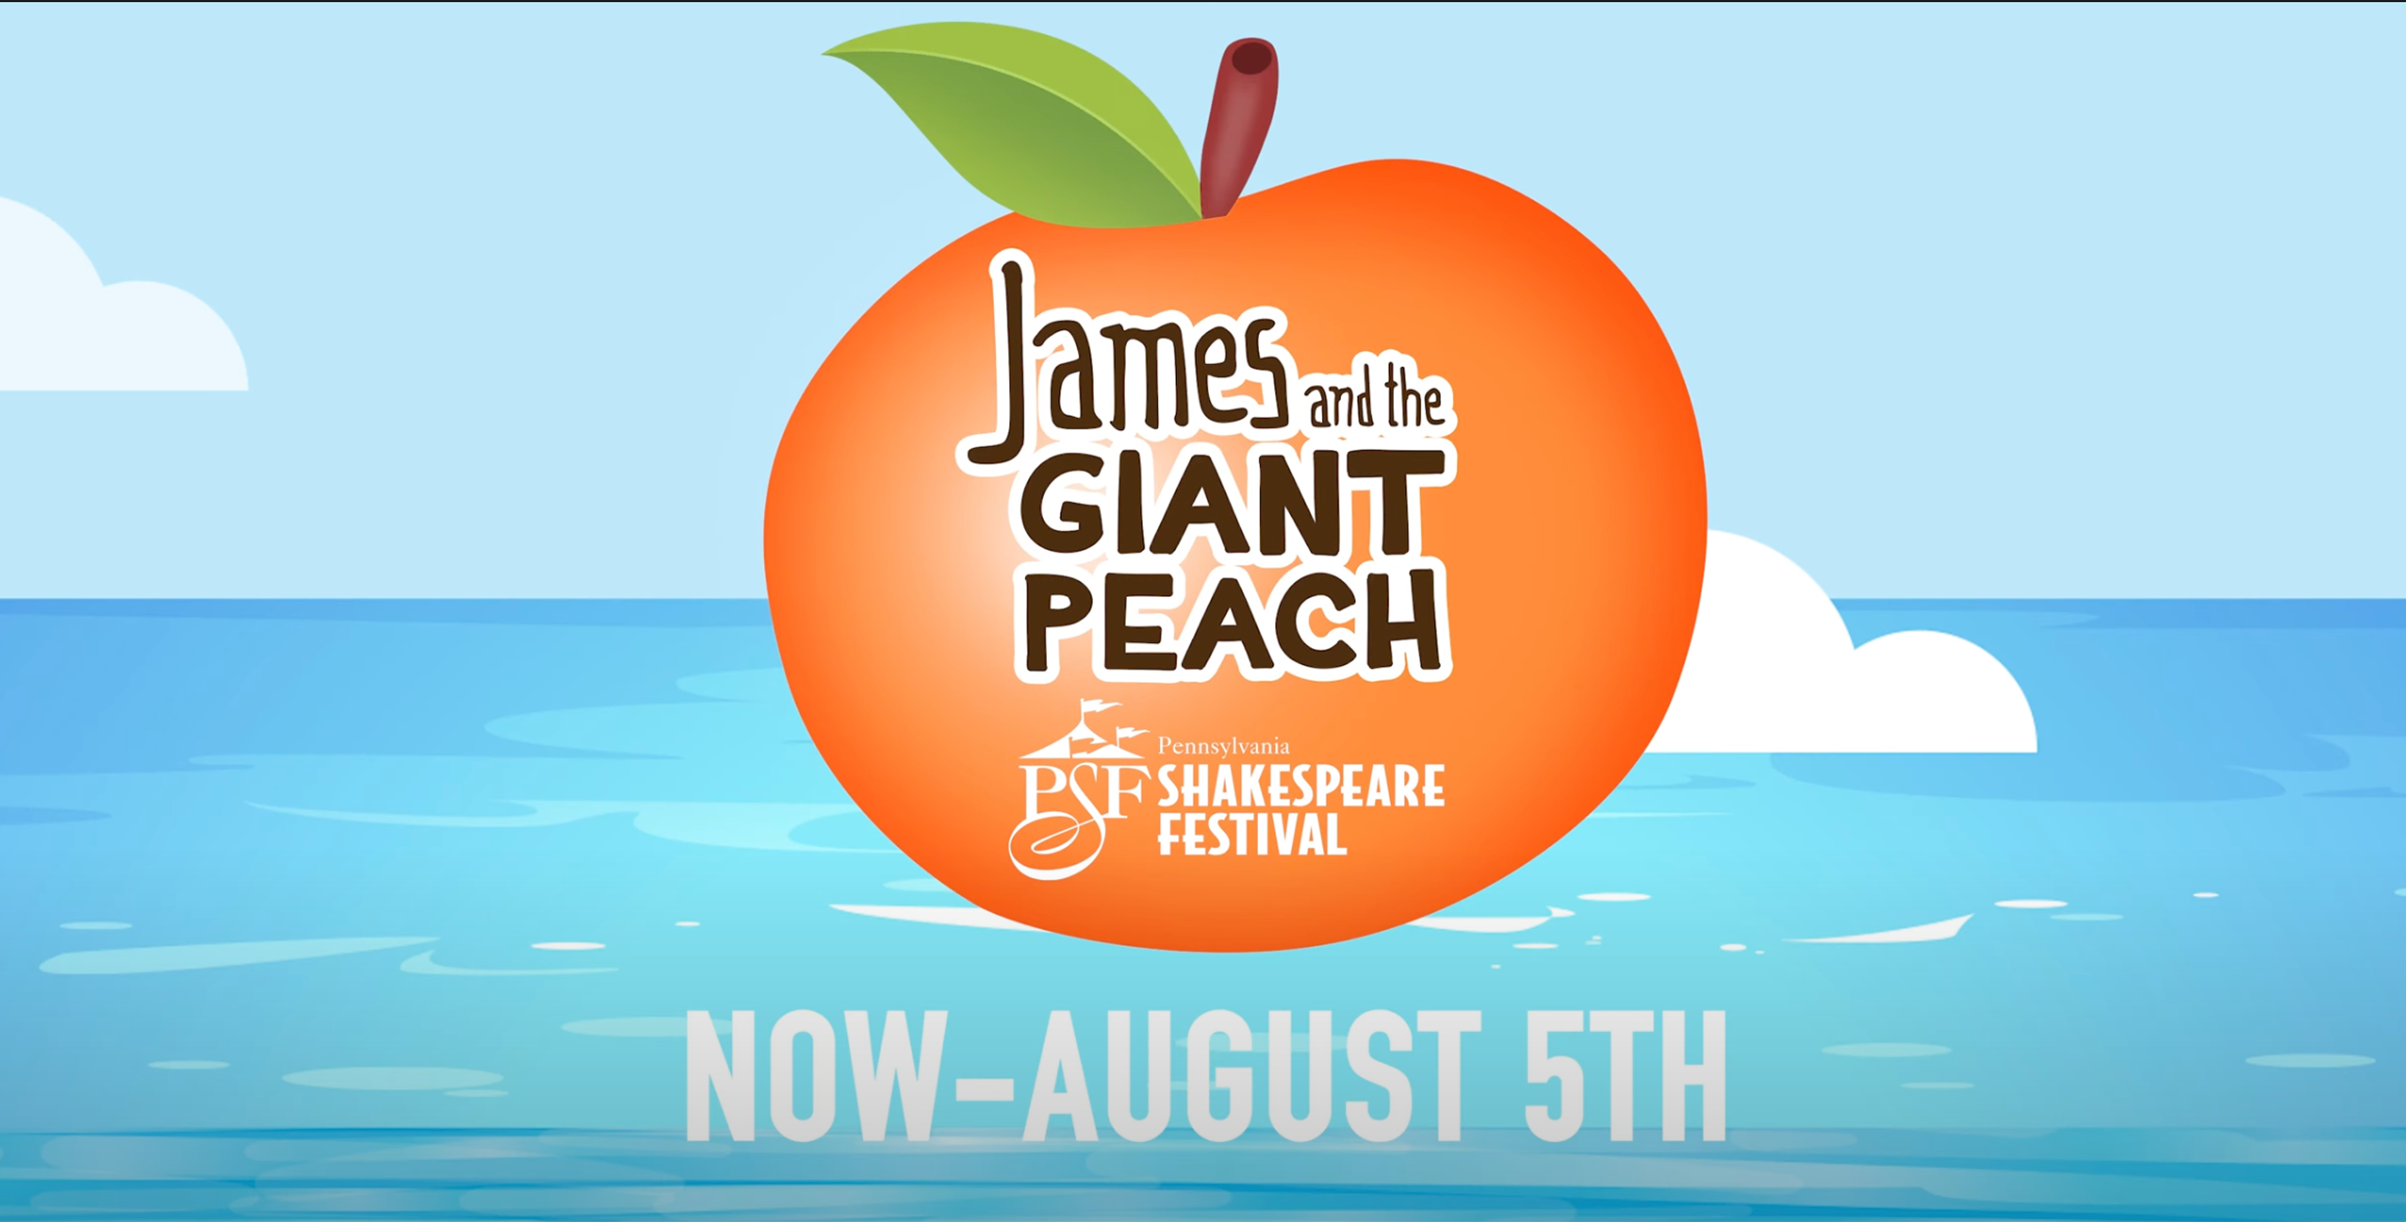 James and the Giant Peach Trailer